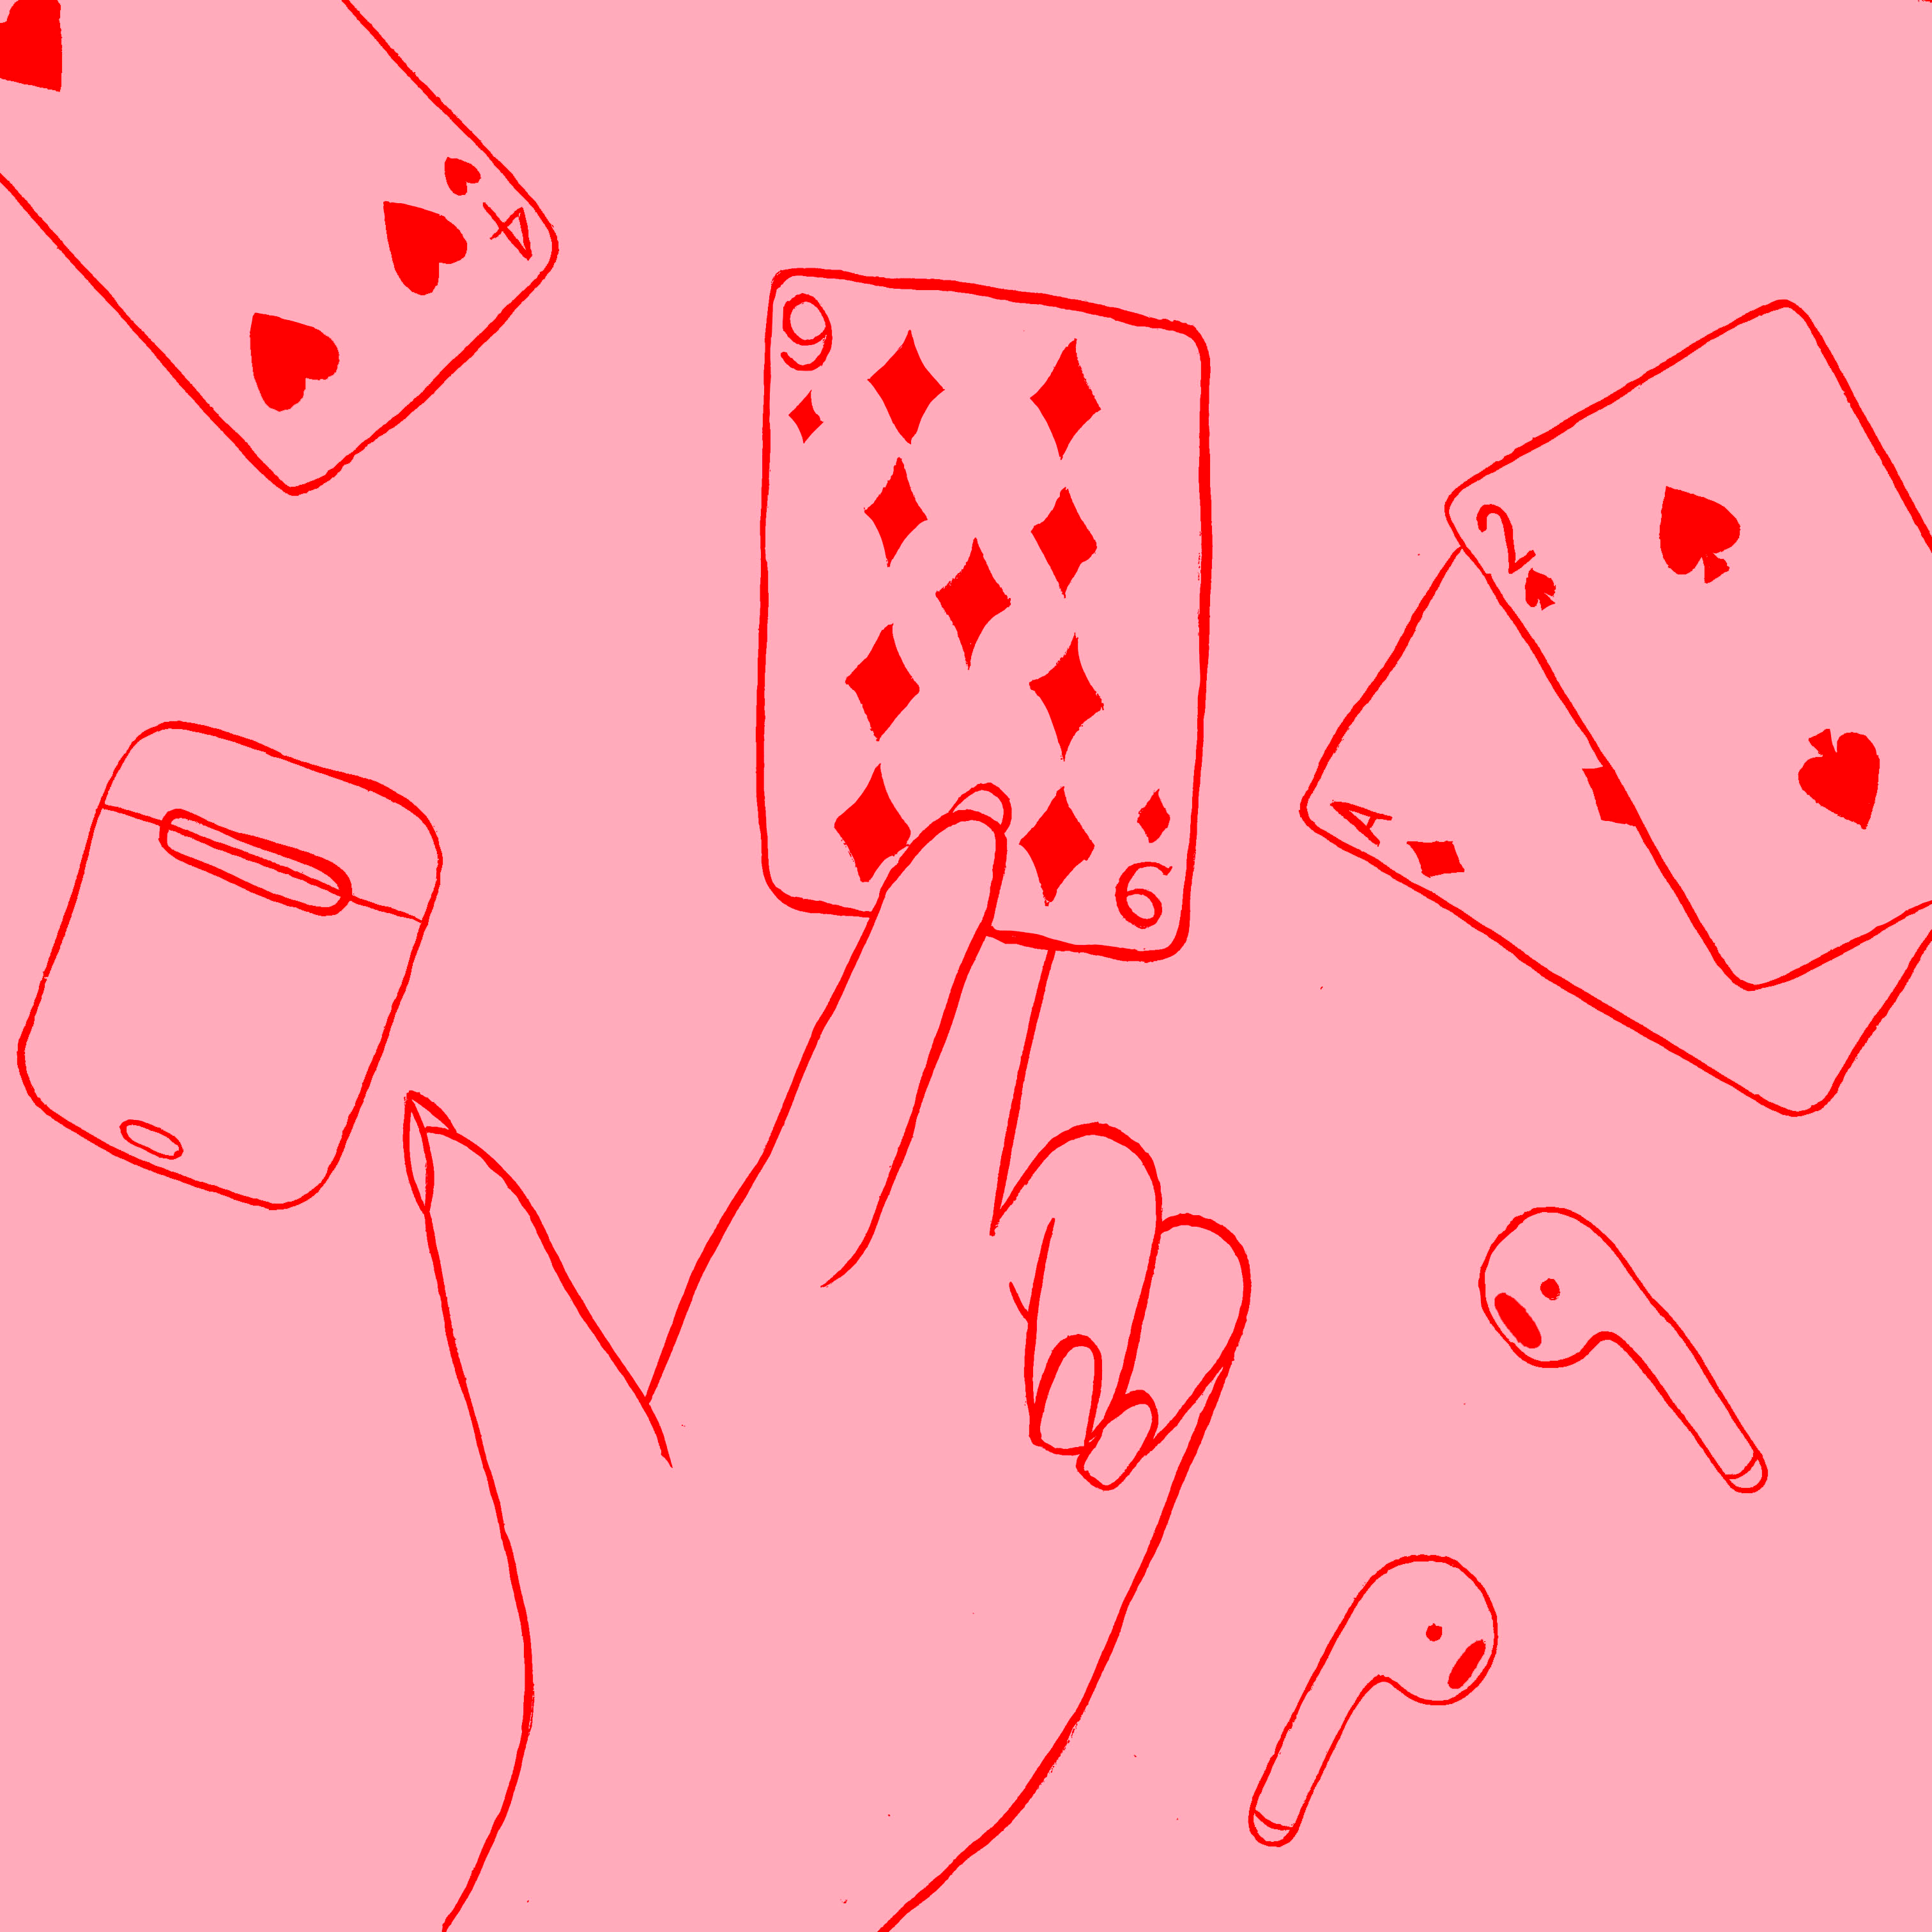 Illustration artwork of a hand holding a playing card